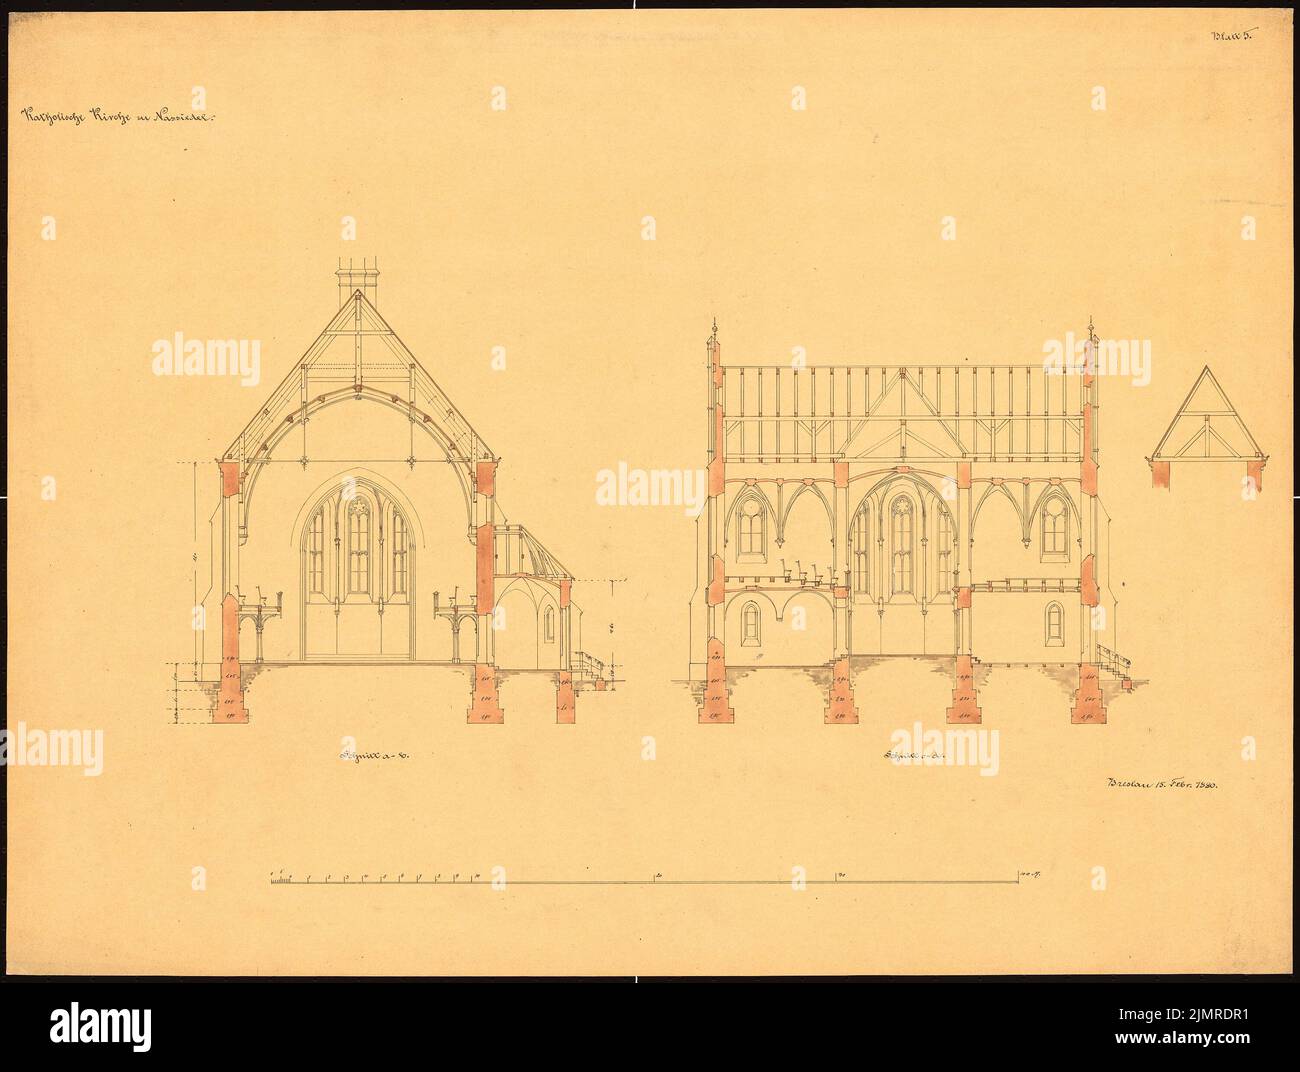 Lüdecke Carl Johann Bogislaw (1826-1894), Catholic Church in Nassiedel (February 15, 1880): 1 cross-section through the nave, 1 longitudinal section through the transept, 1 detailed cut through the roof structure, scale bar. Tusche watercolor on transparent, 53.5 x 70.7 cm (including scan edges) Lüdecke Carl Johann Bogislaw  (1826-1894): Katholische Kirche, Nassiedel Stock Photo